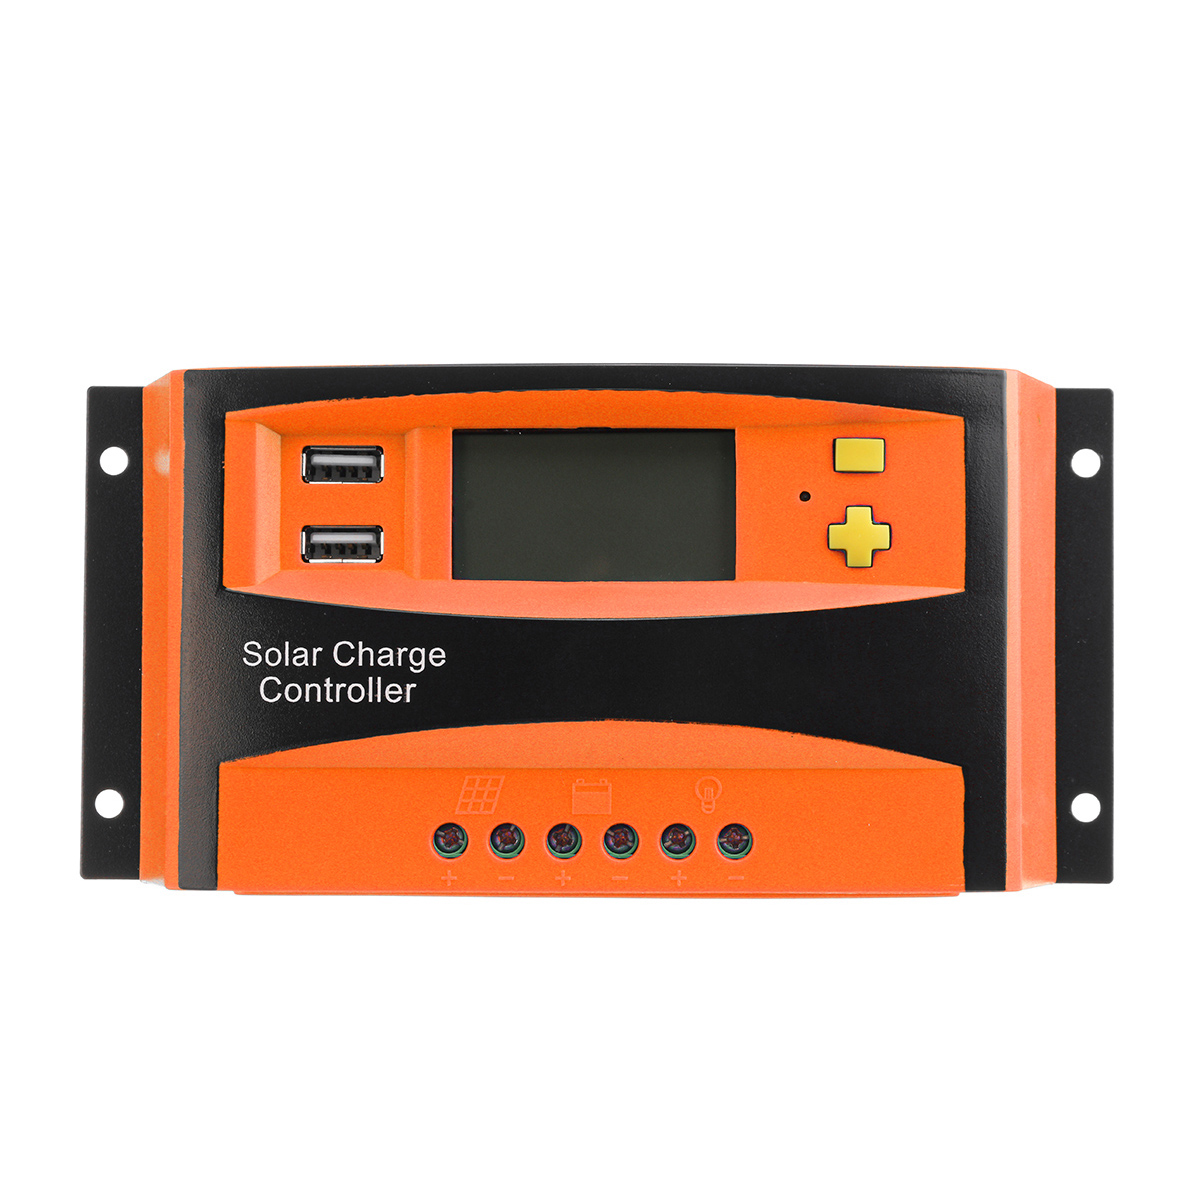 

12/24V AUTO 20A/30A/40A/50A/60A Solar Controller Support Dual USB Output & Over-Load Protection for Solar Panel Connecting